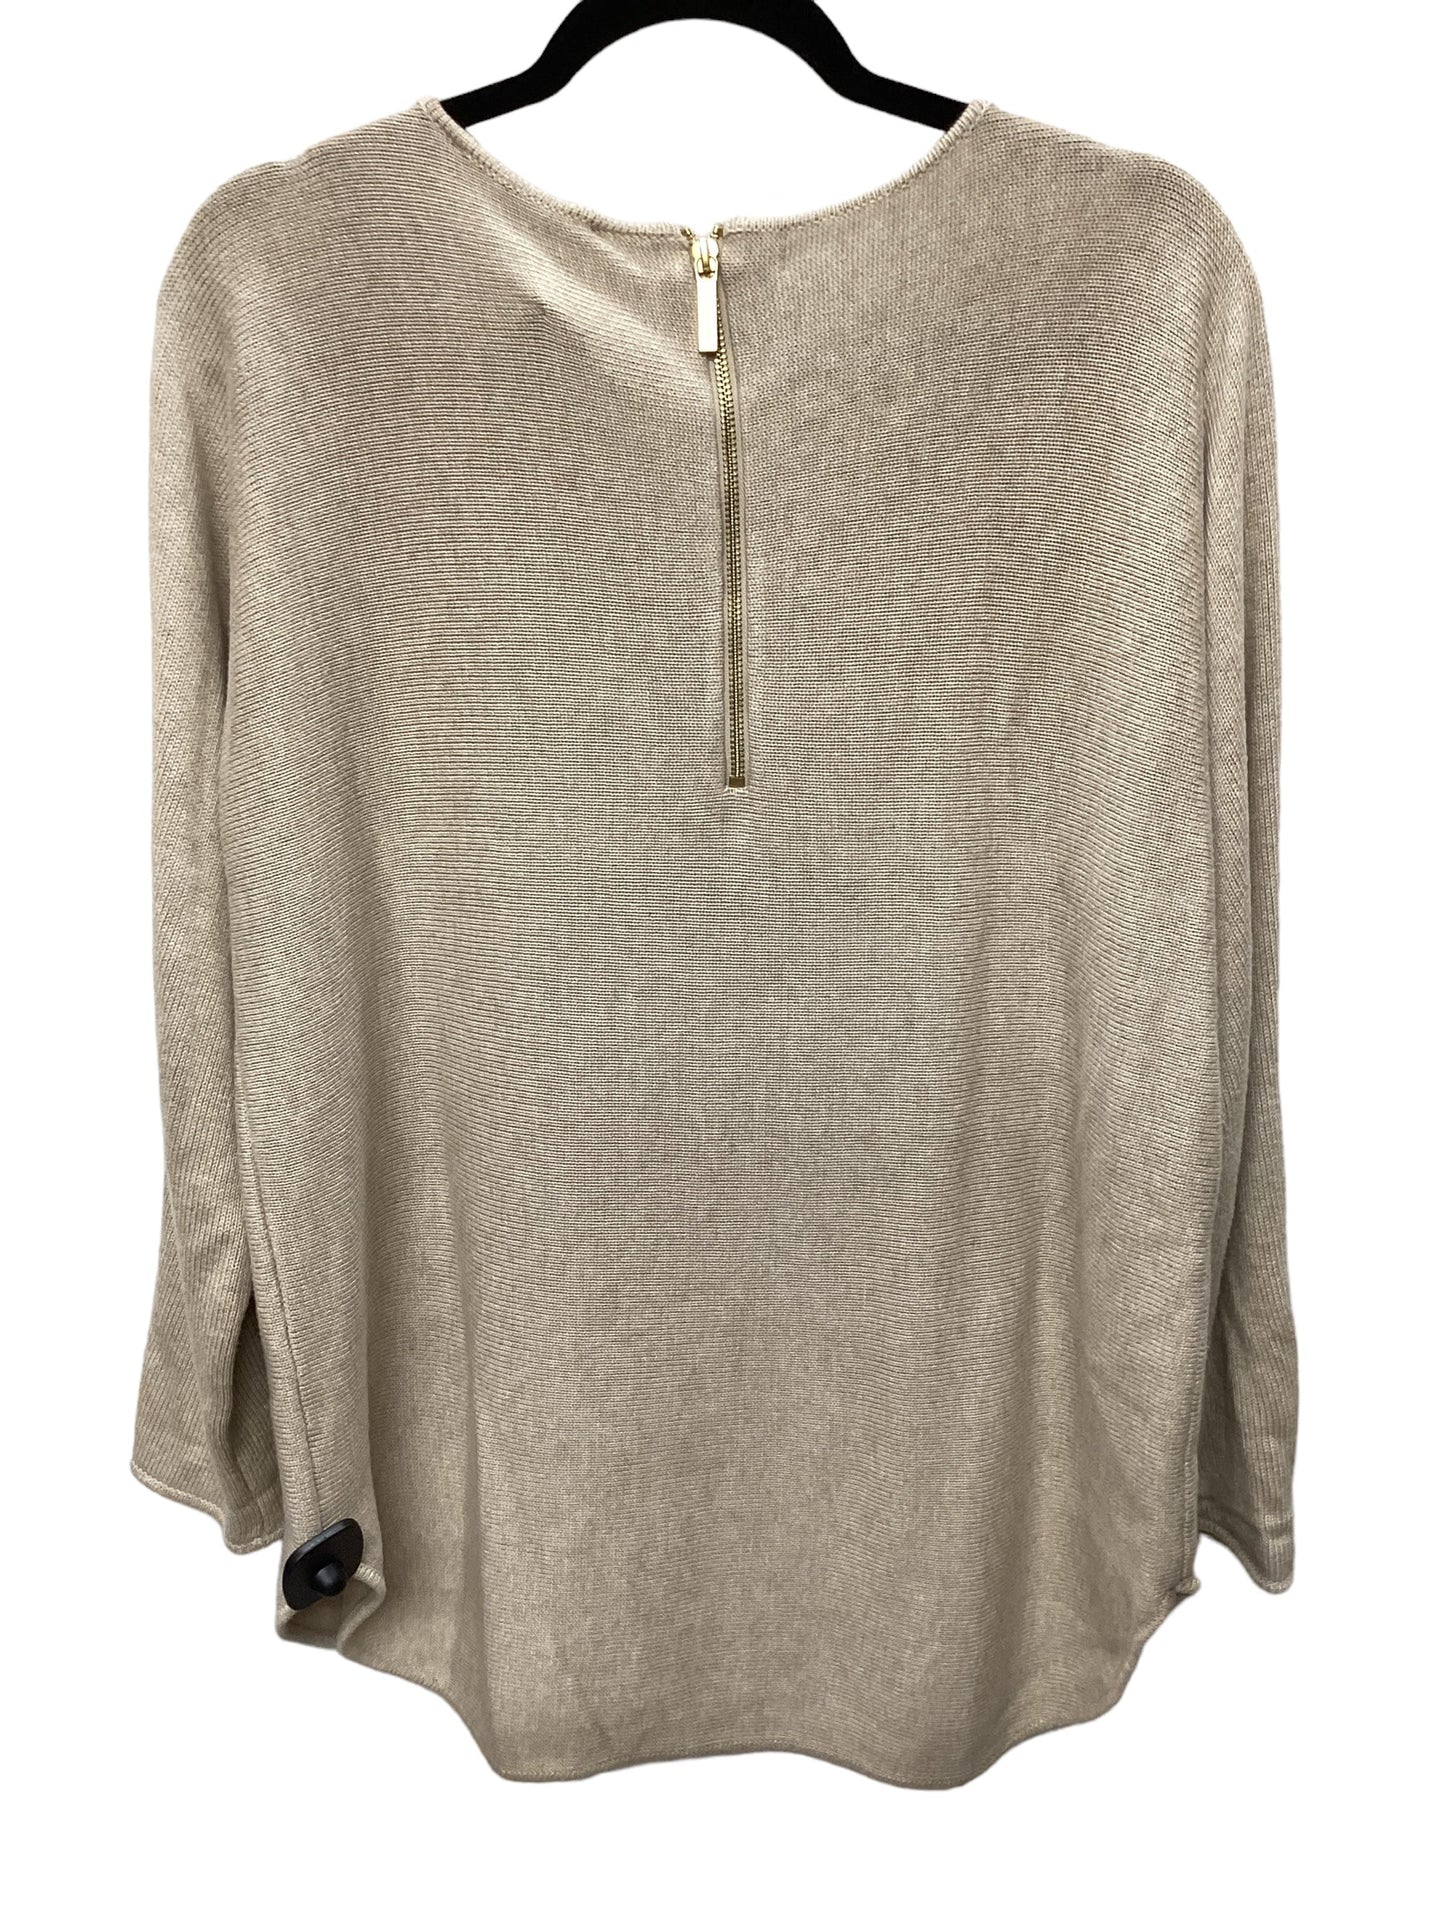 Top Long Sleeve By Michael Kors  Size: L